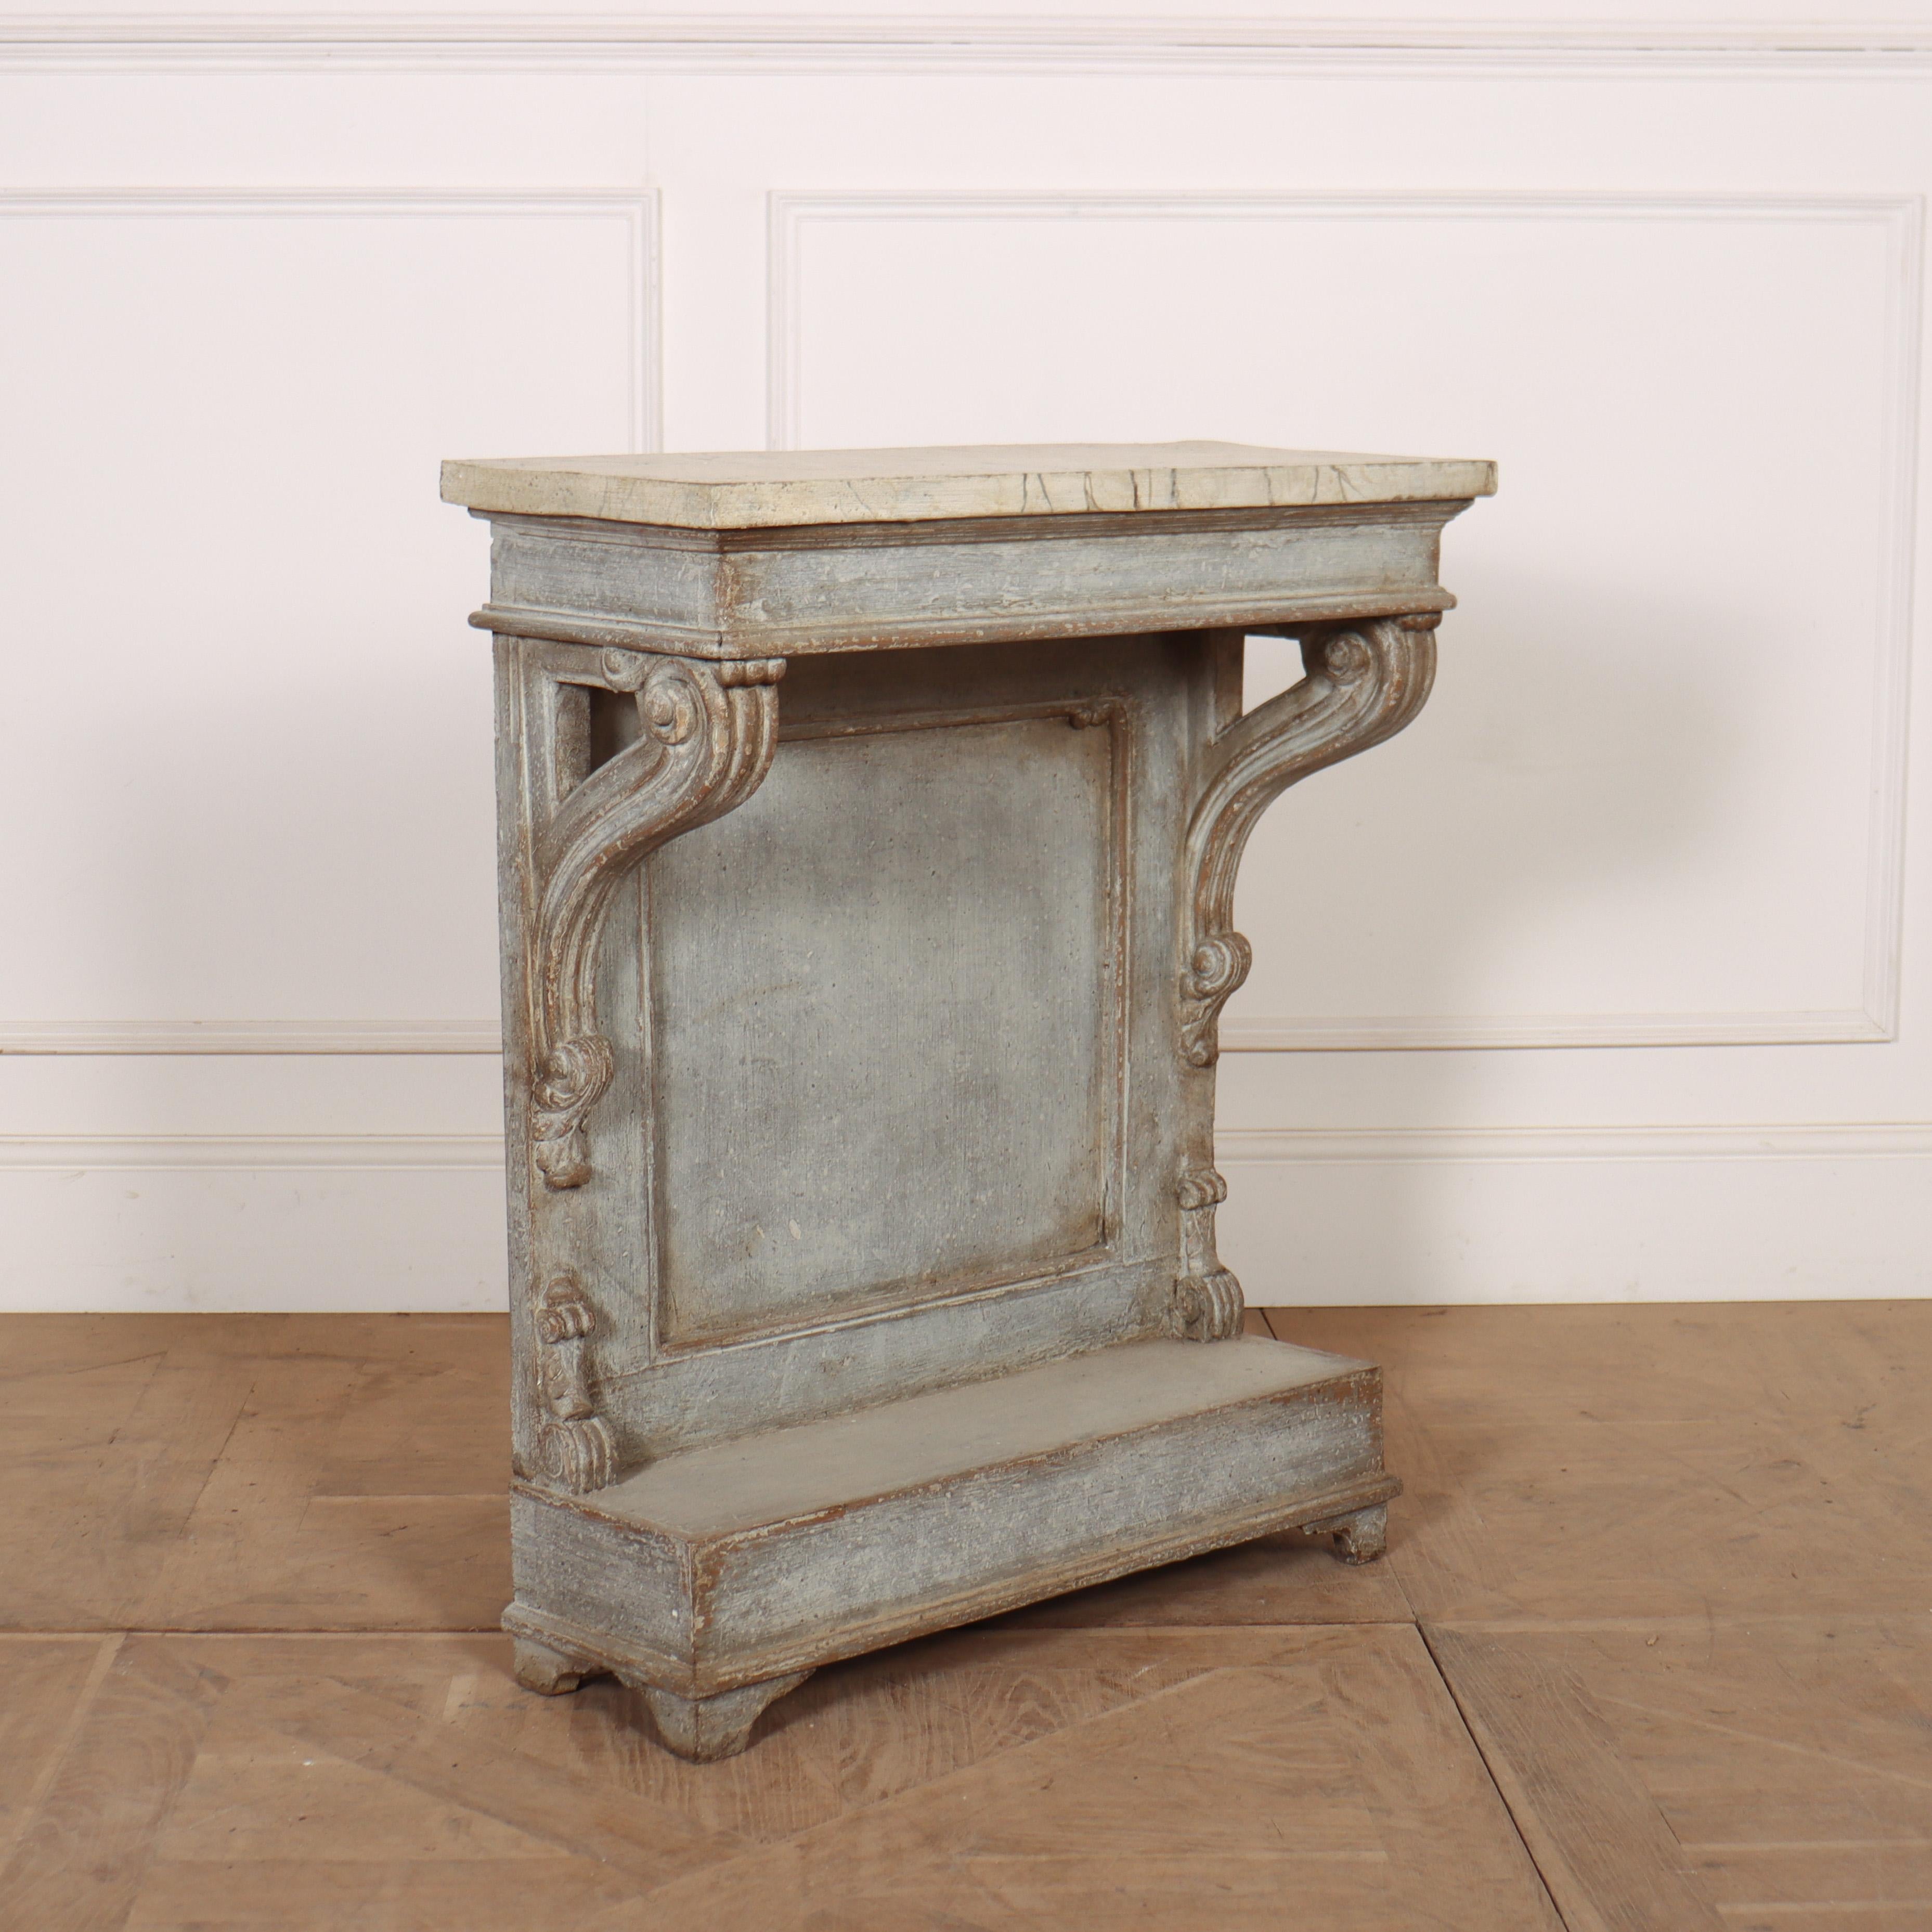 Small 19th C French painted pine console table with faux marble top. 1860.

Reference: 7953

Dimensions
27.5 inches (70 cms) Wide
11.5 inches (29 cms) Deep
32.5 inches (83 cms) High